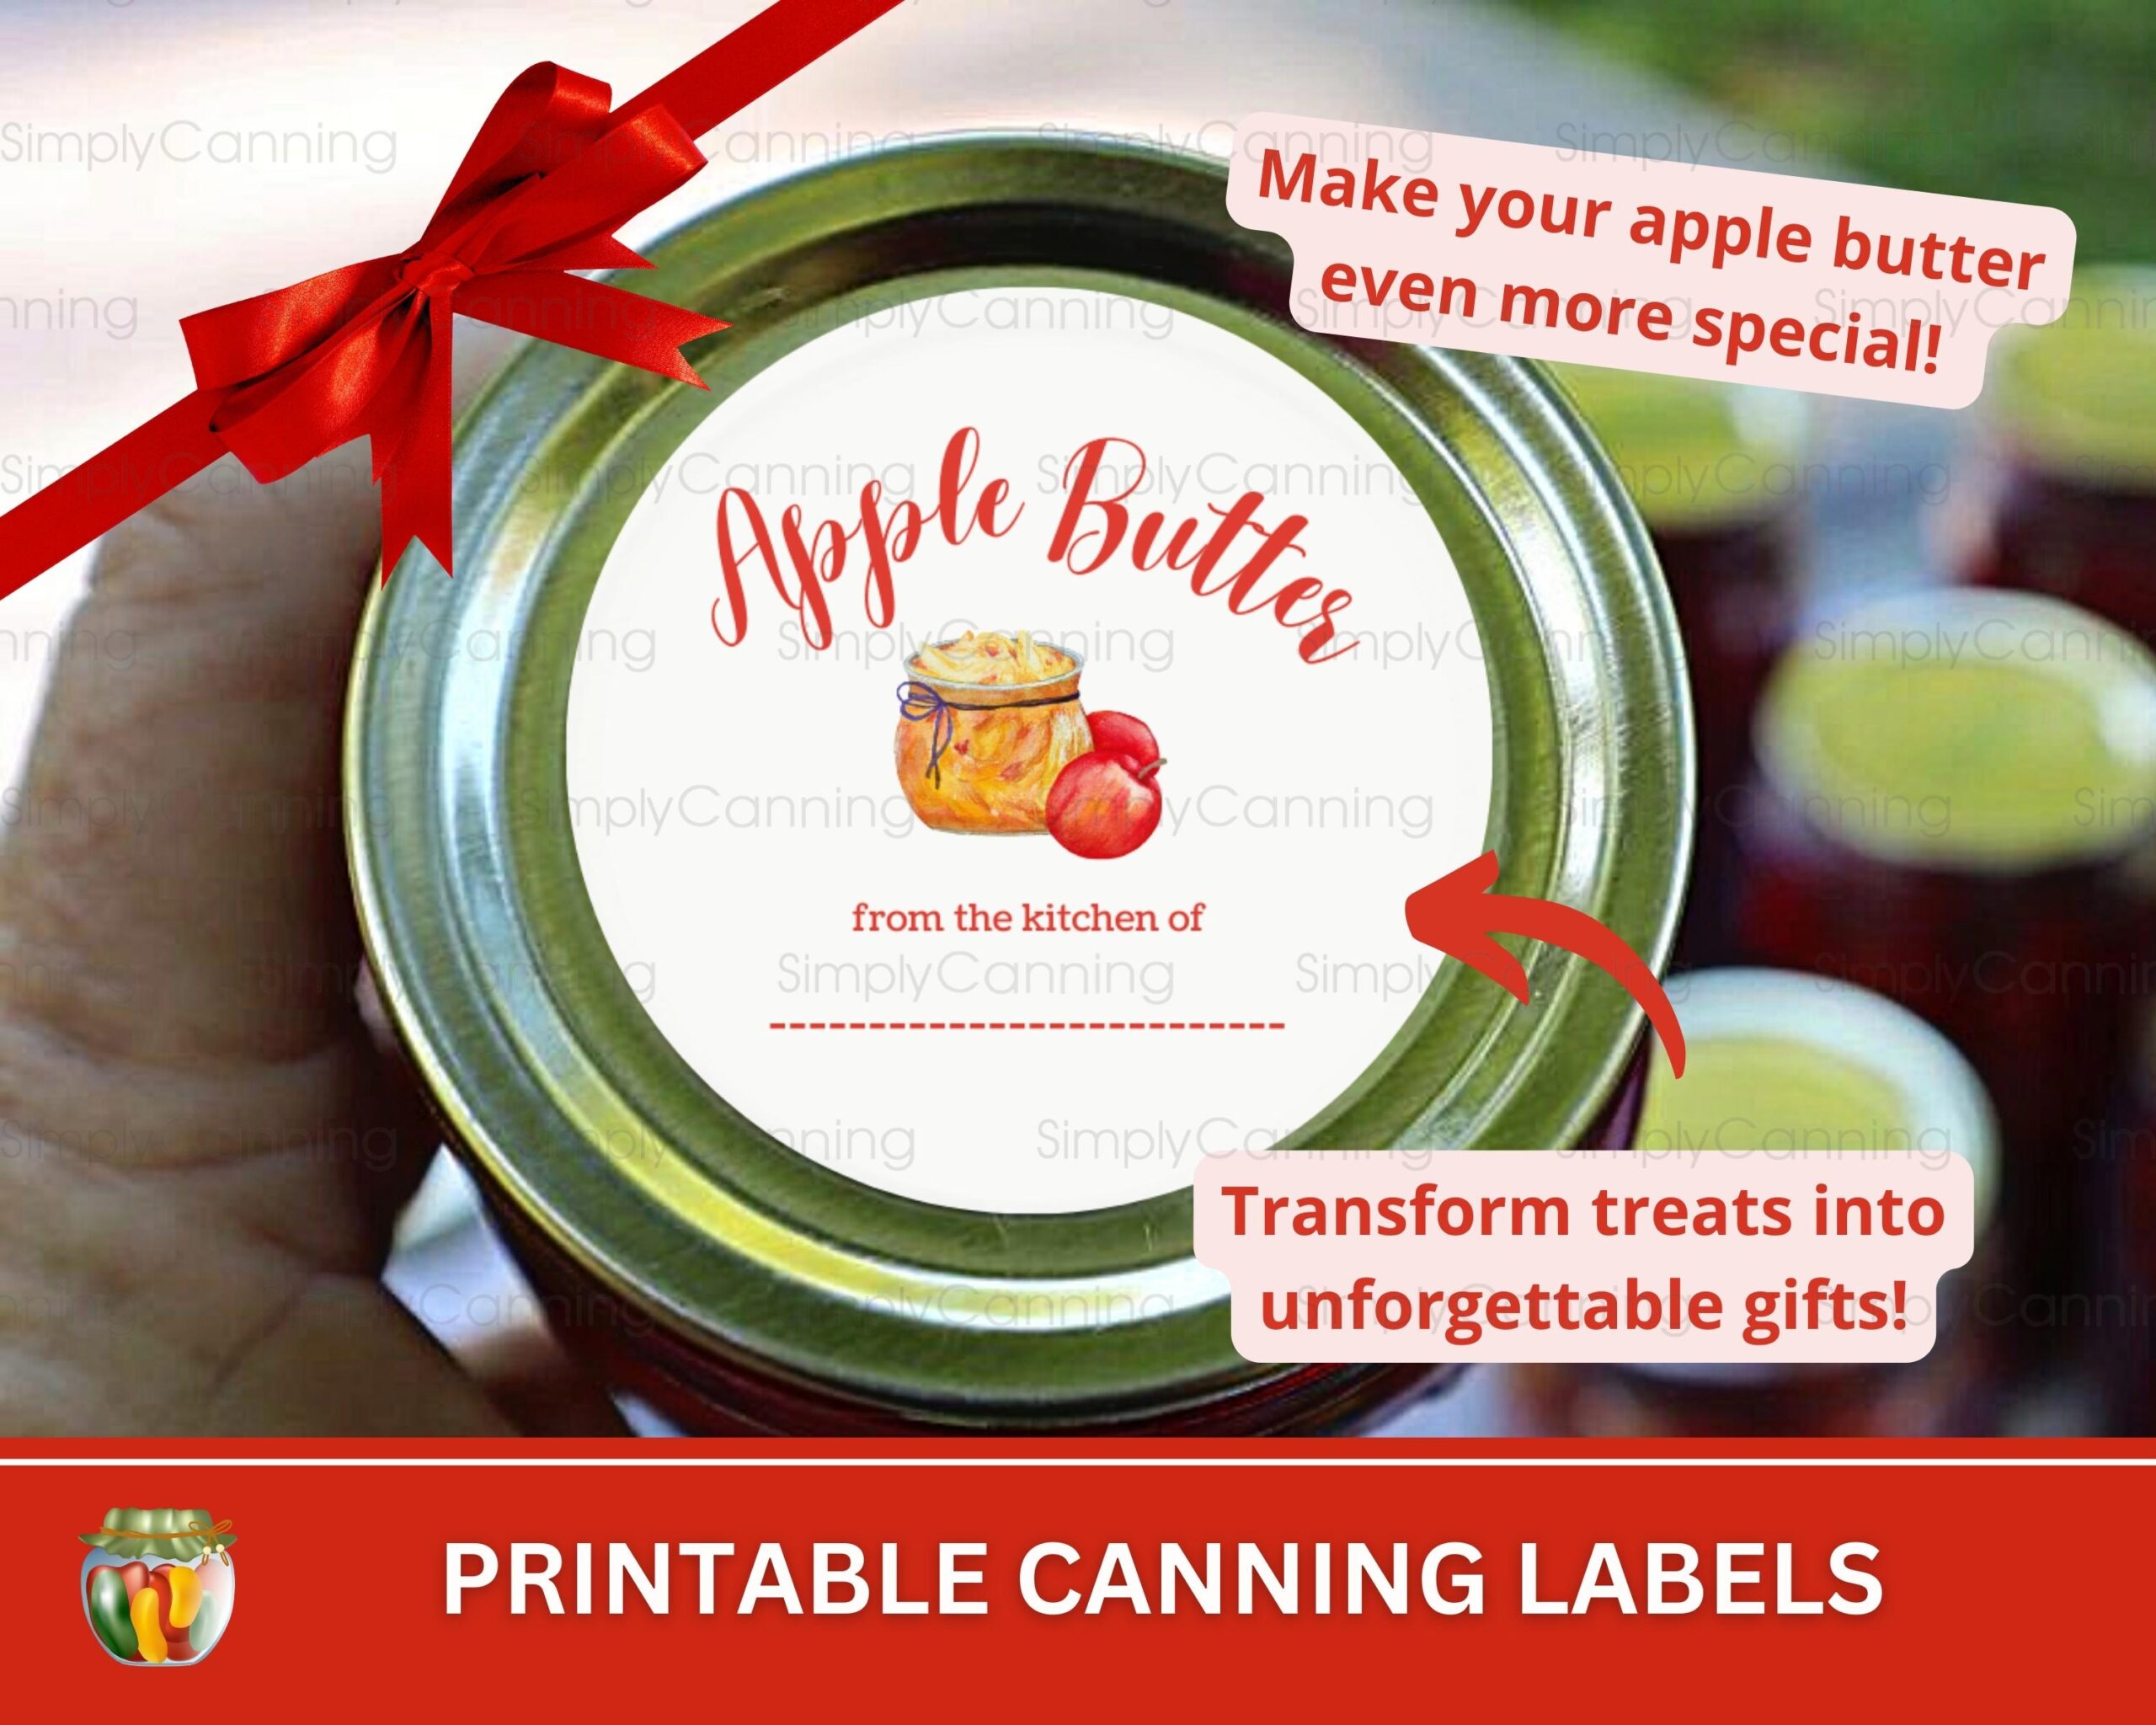 Image of apple butter canning label, links to printable canning labels to purchase.